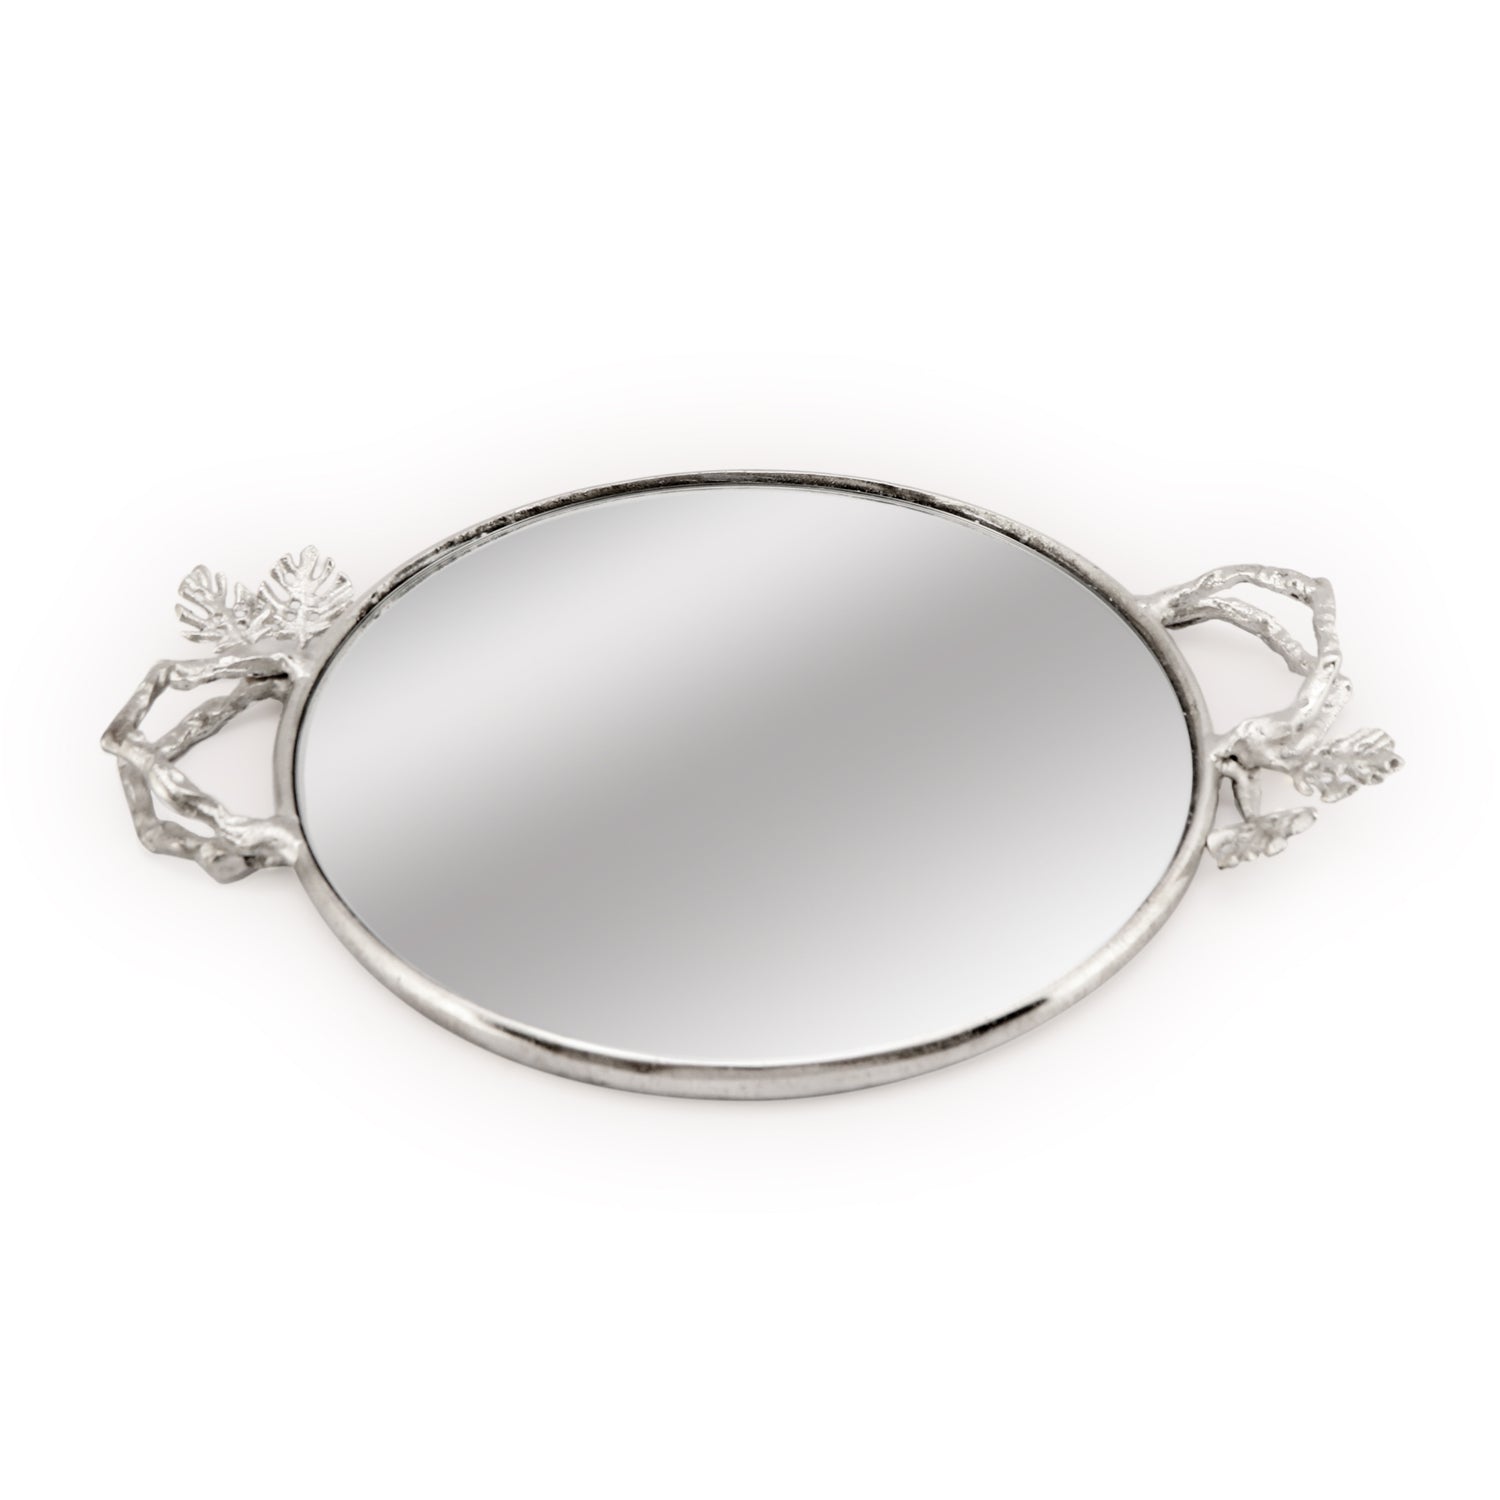 Mirror Tray - Silver Leaf 2- The Home Co.